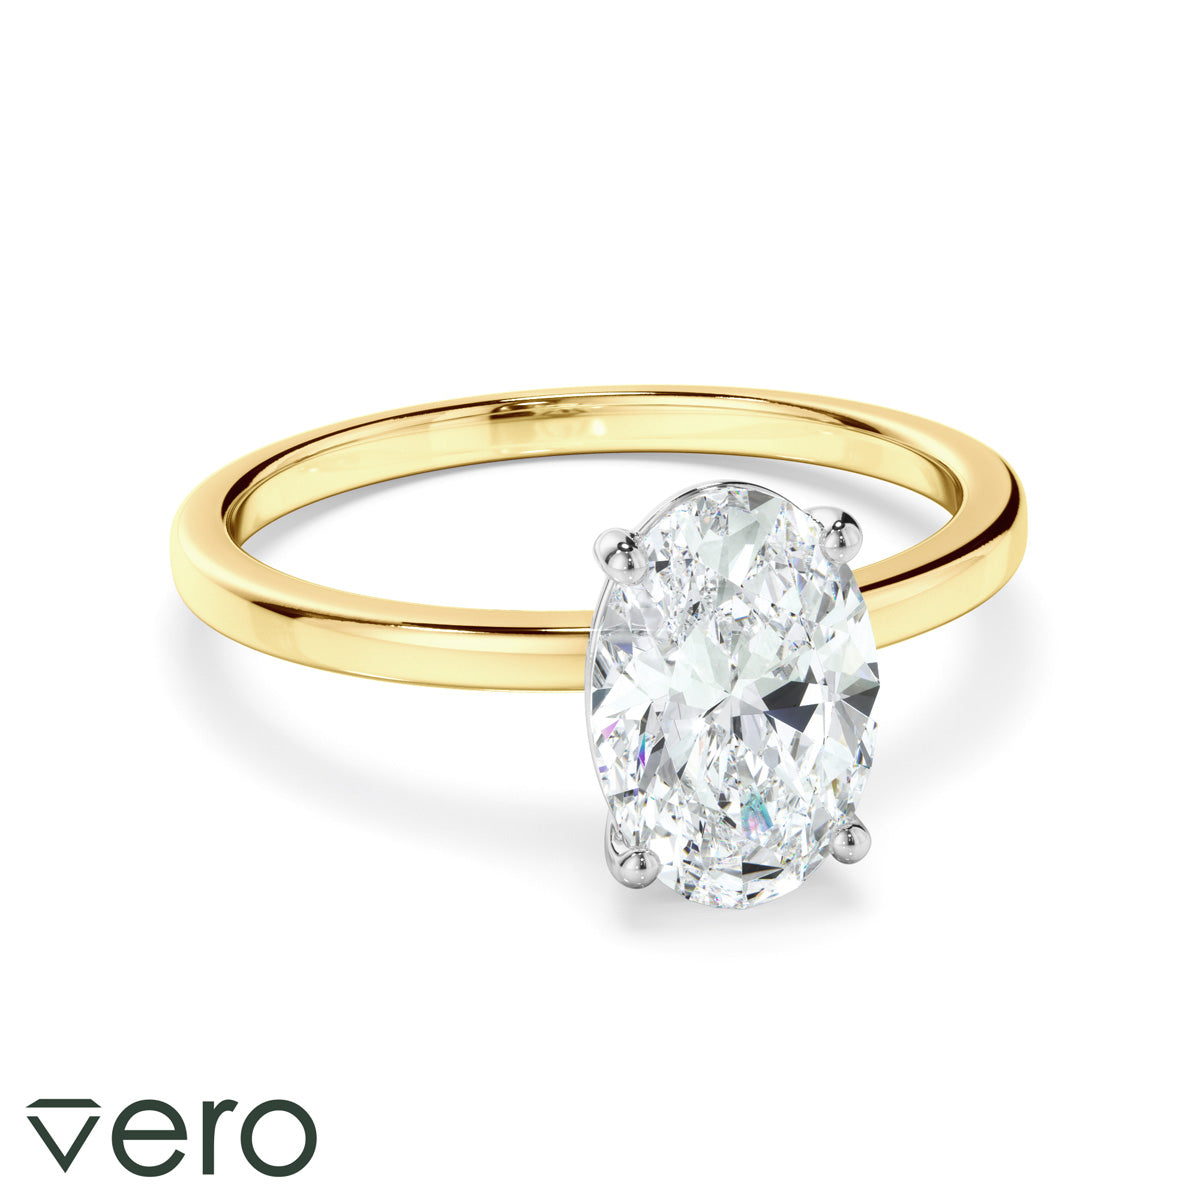 1ct Oval Cut Lab Grown Diamond Ring Set in 18ct Yellow Gold